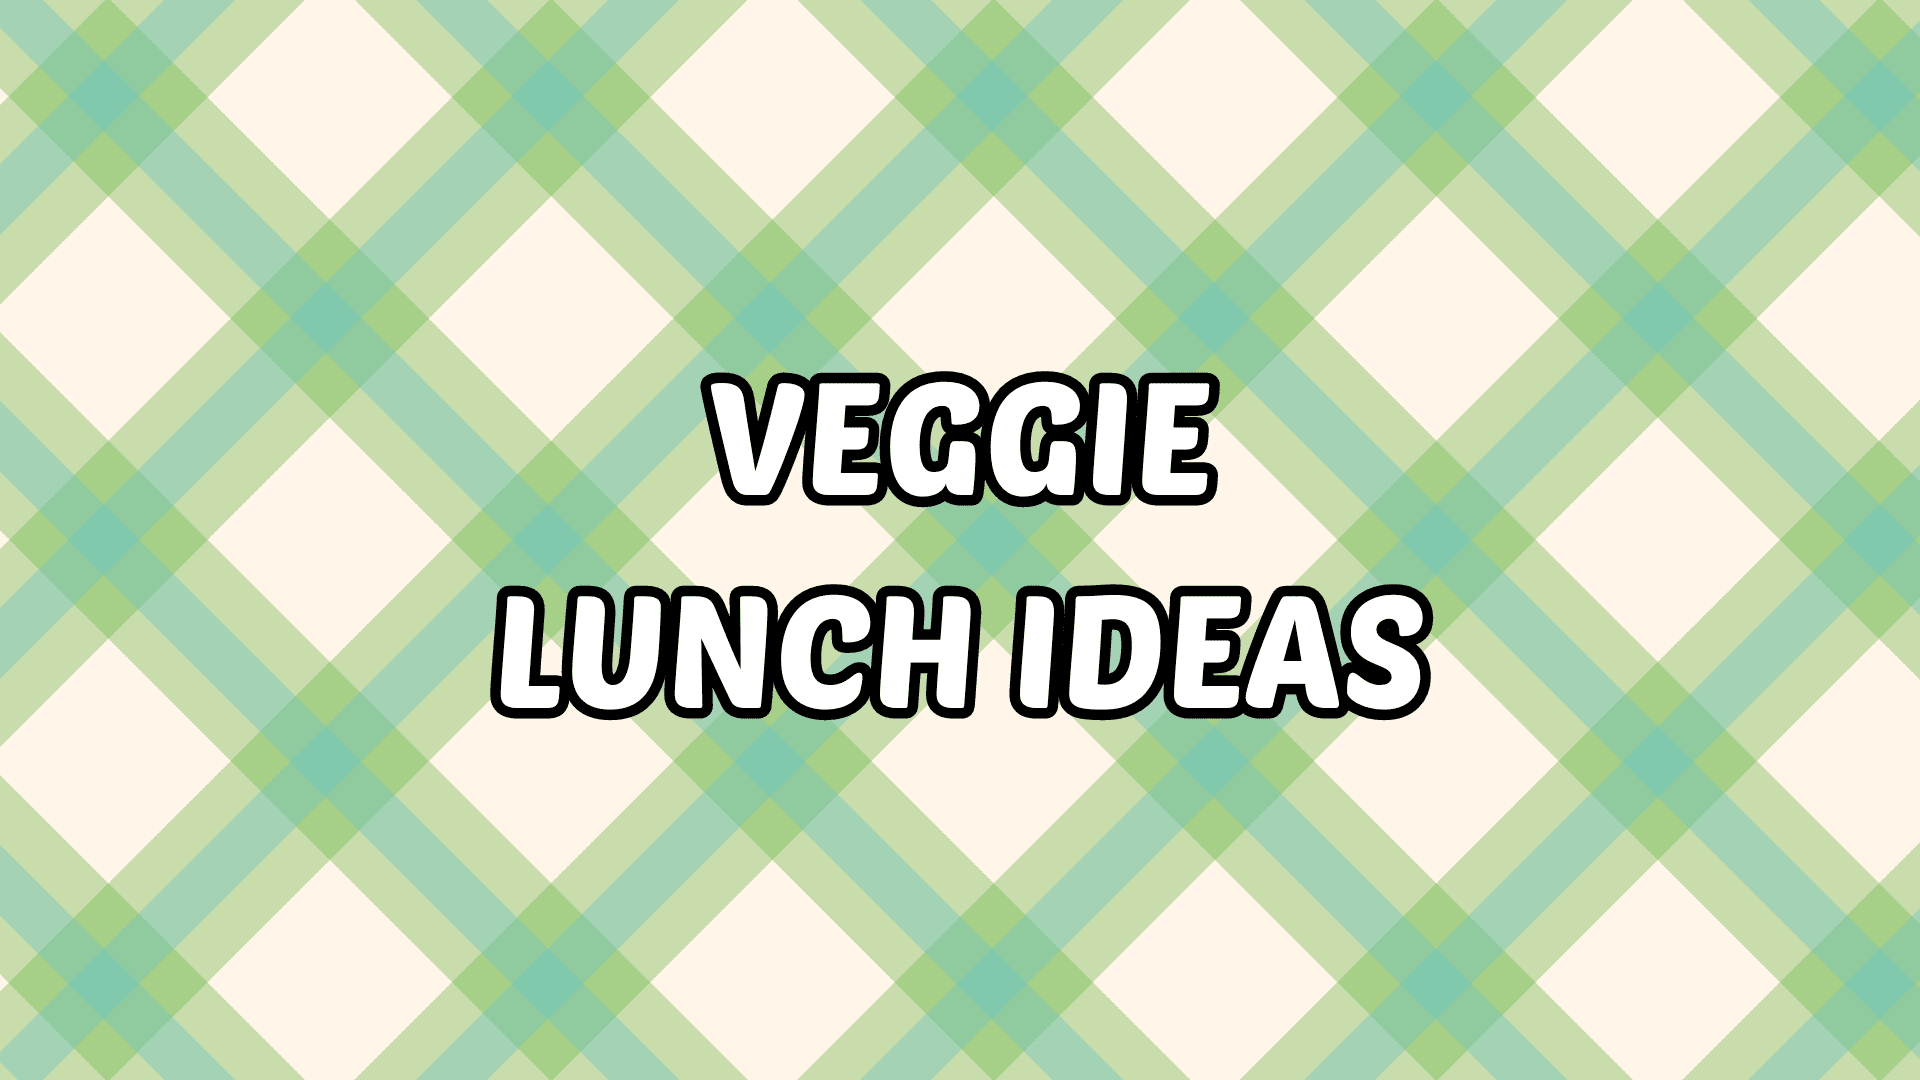 Veggie lunch ideas for kids with green plaid picnic background